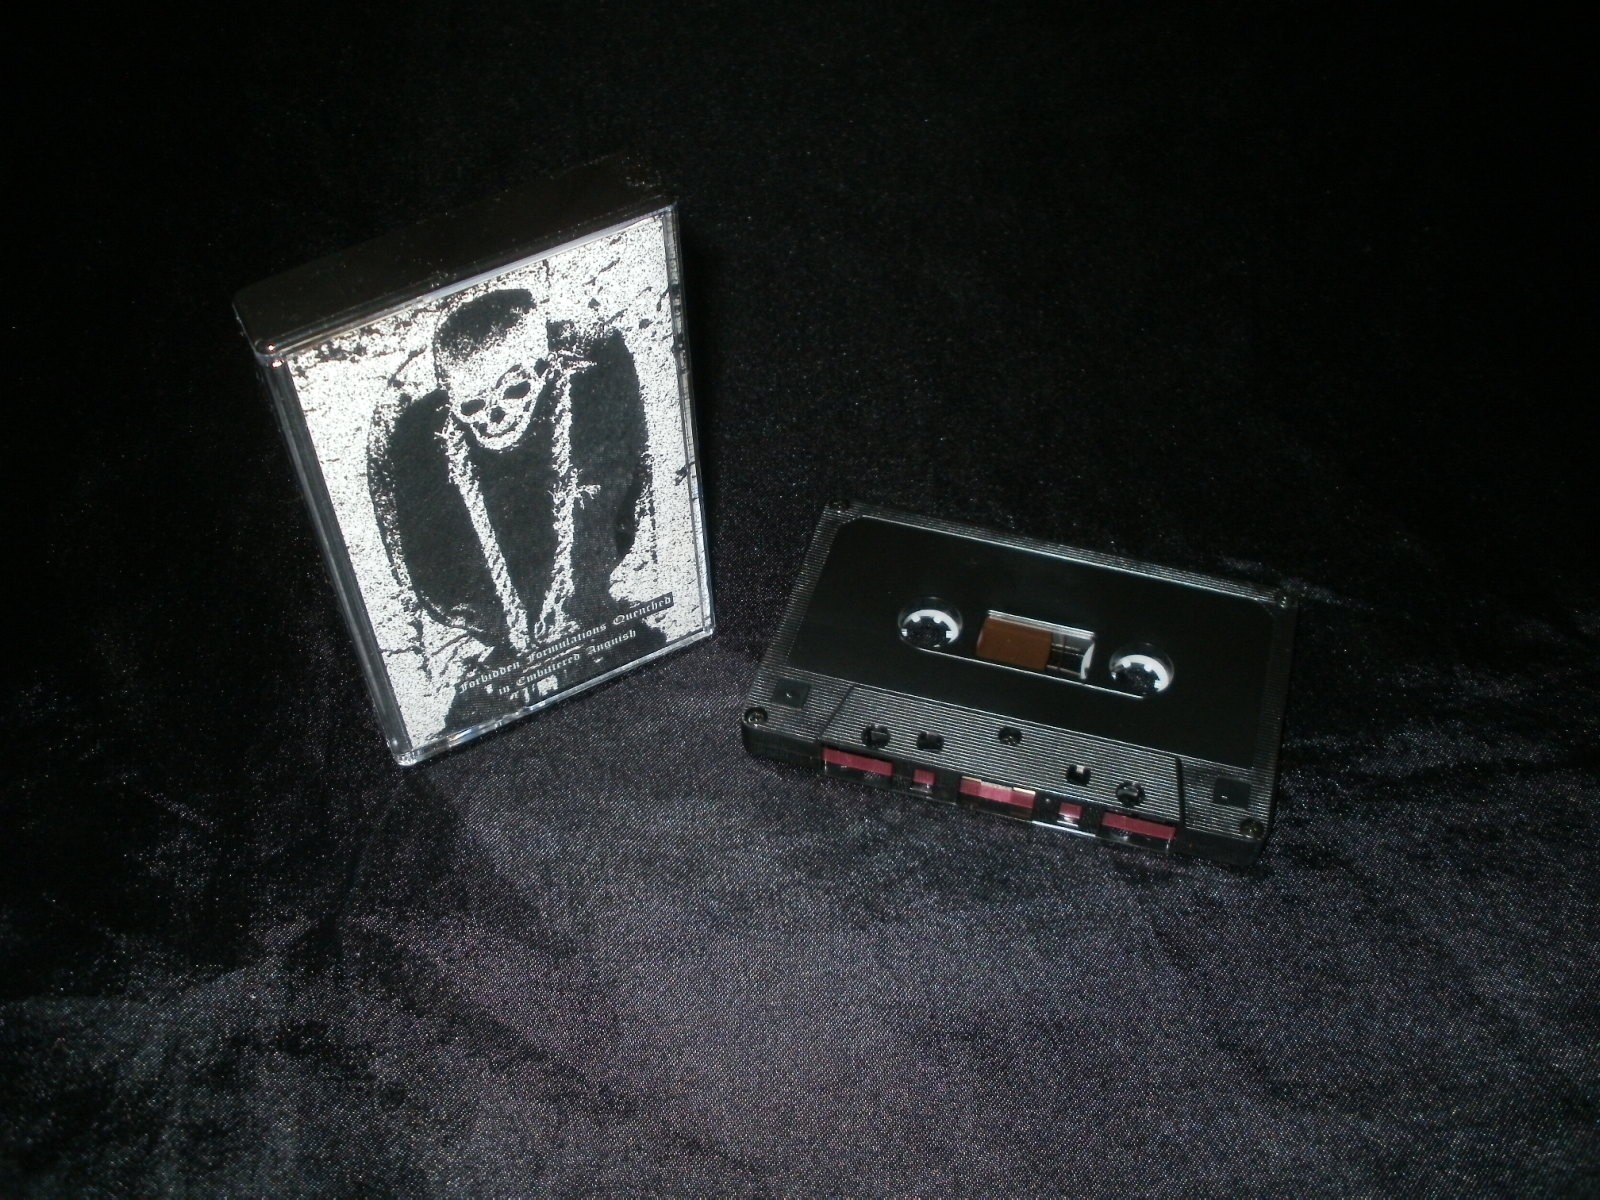 FUNERARY TEMPLE / MEGALITH GRAVE - Forbidden Formulations Quenched in Embittered Anguish Tape 